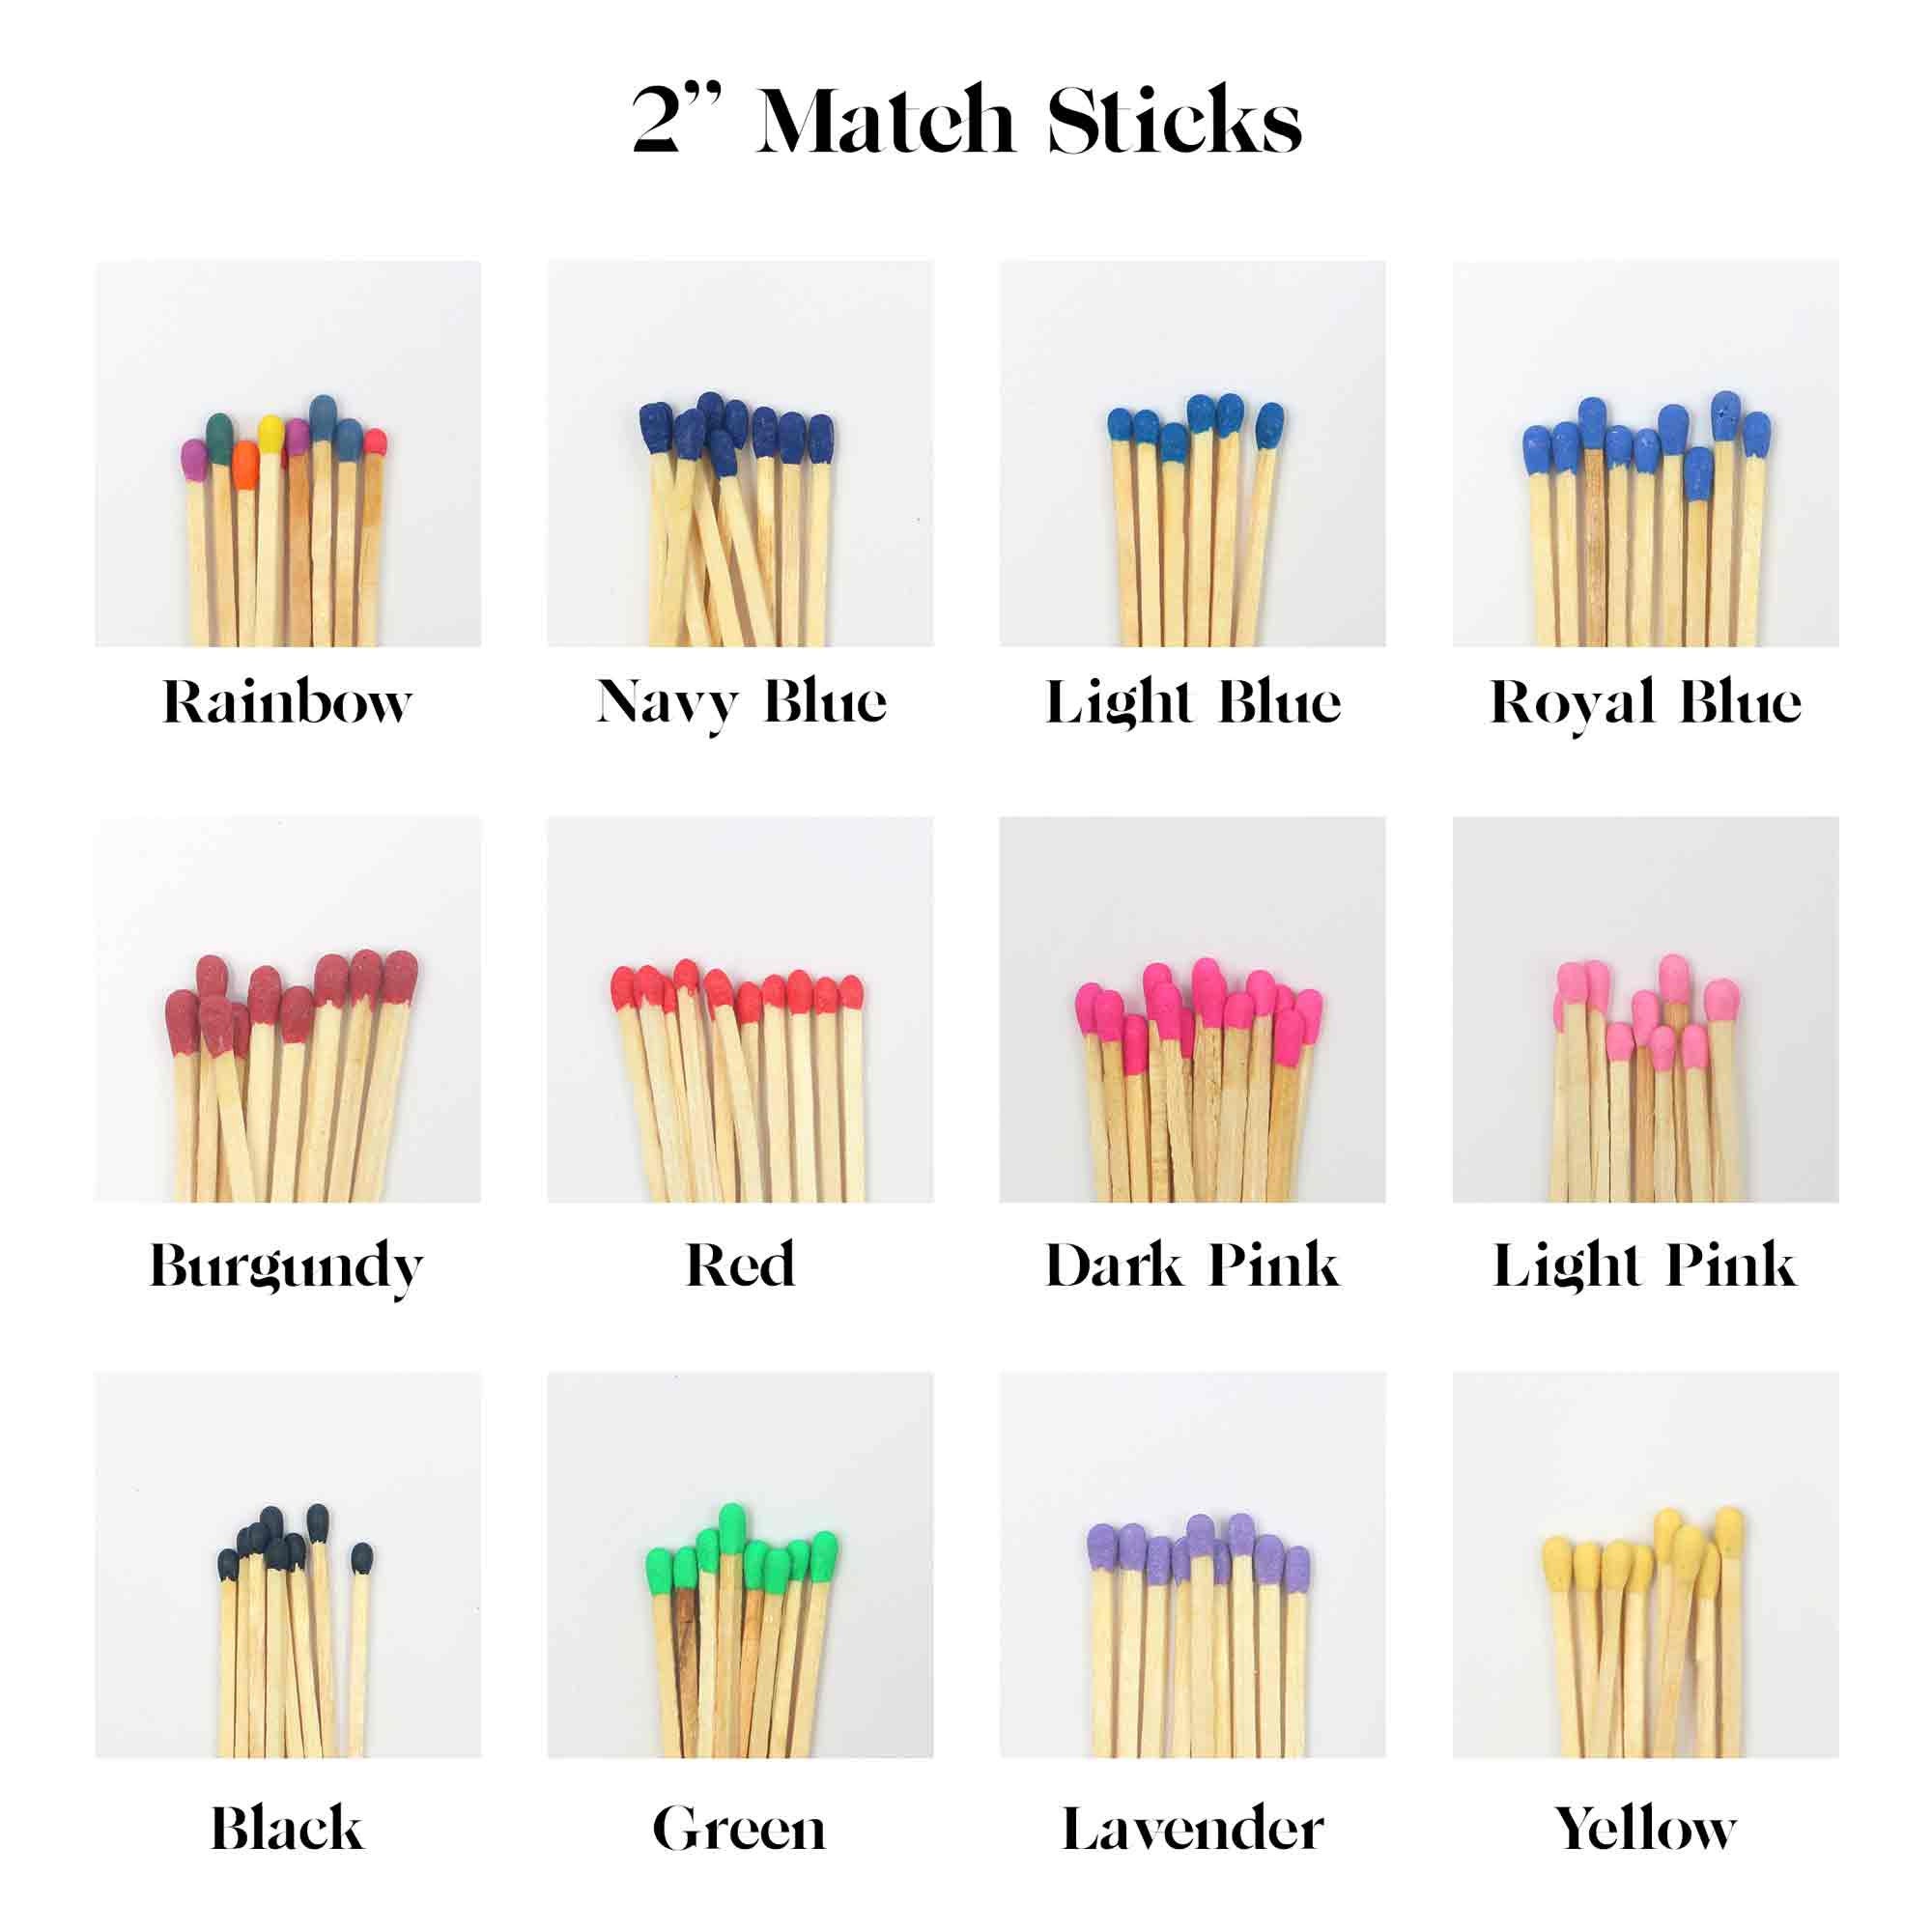 2 Colorful Matches with Strikers | 100 Rainbow Small Safety Matchsticks with Striking Pads by Thankful Greetings | Great for Gifts & Candle Lovers